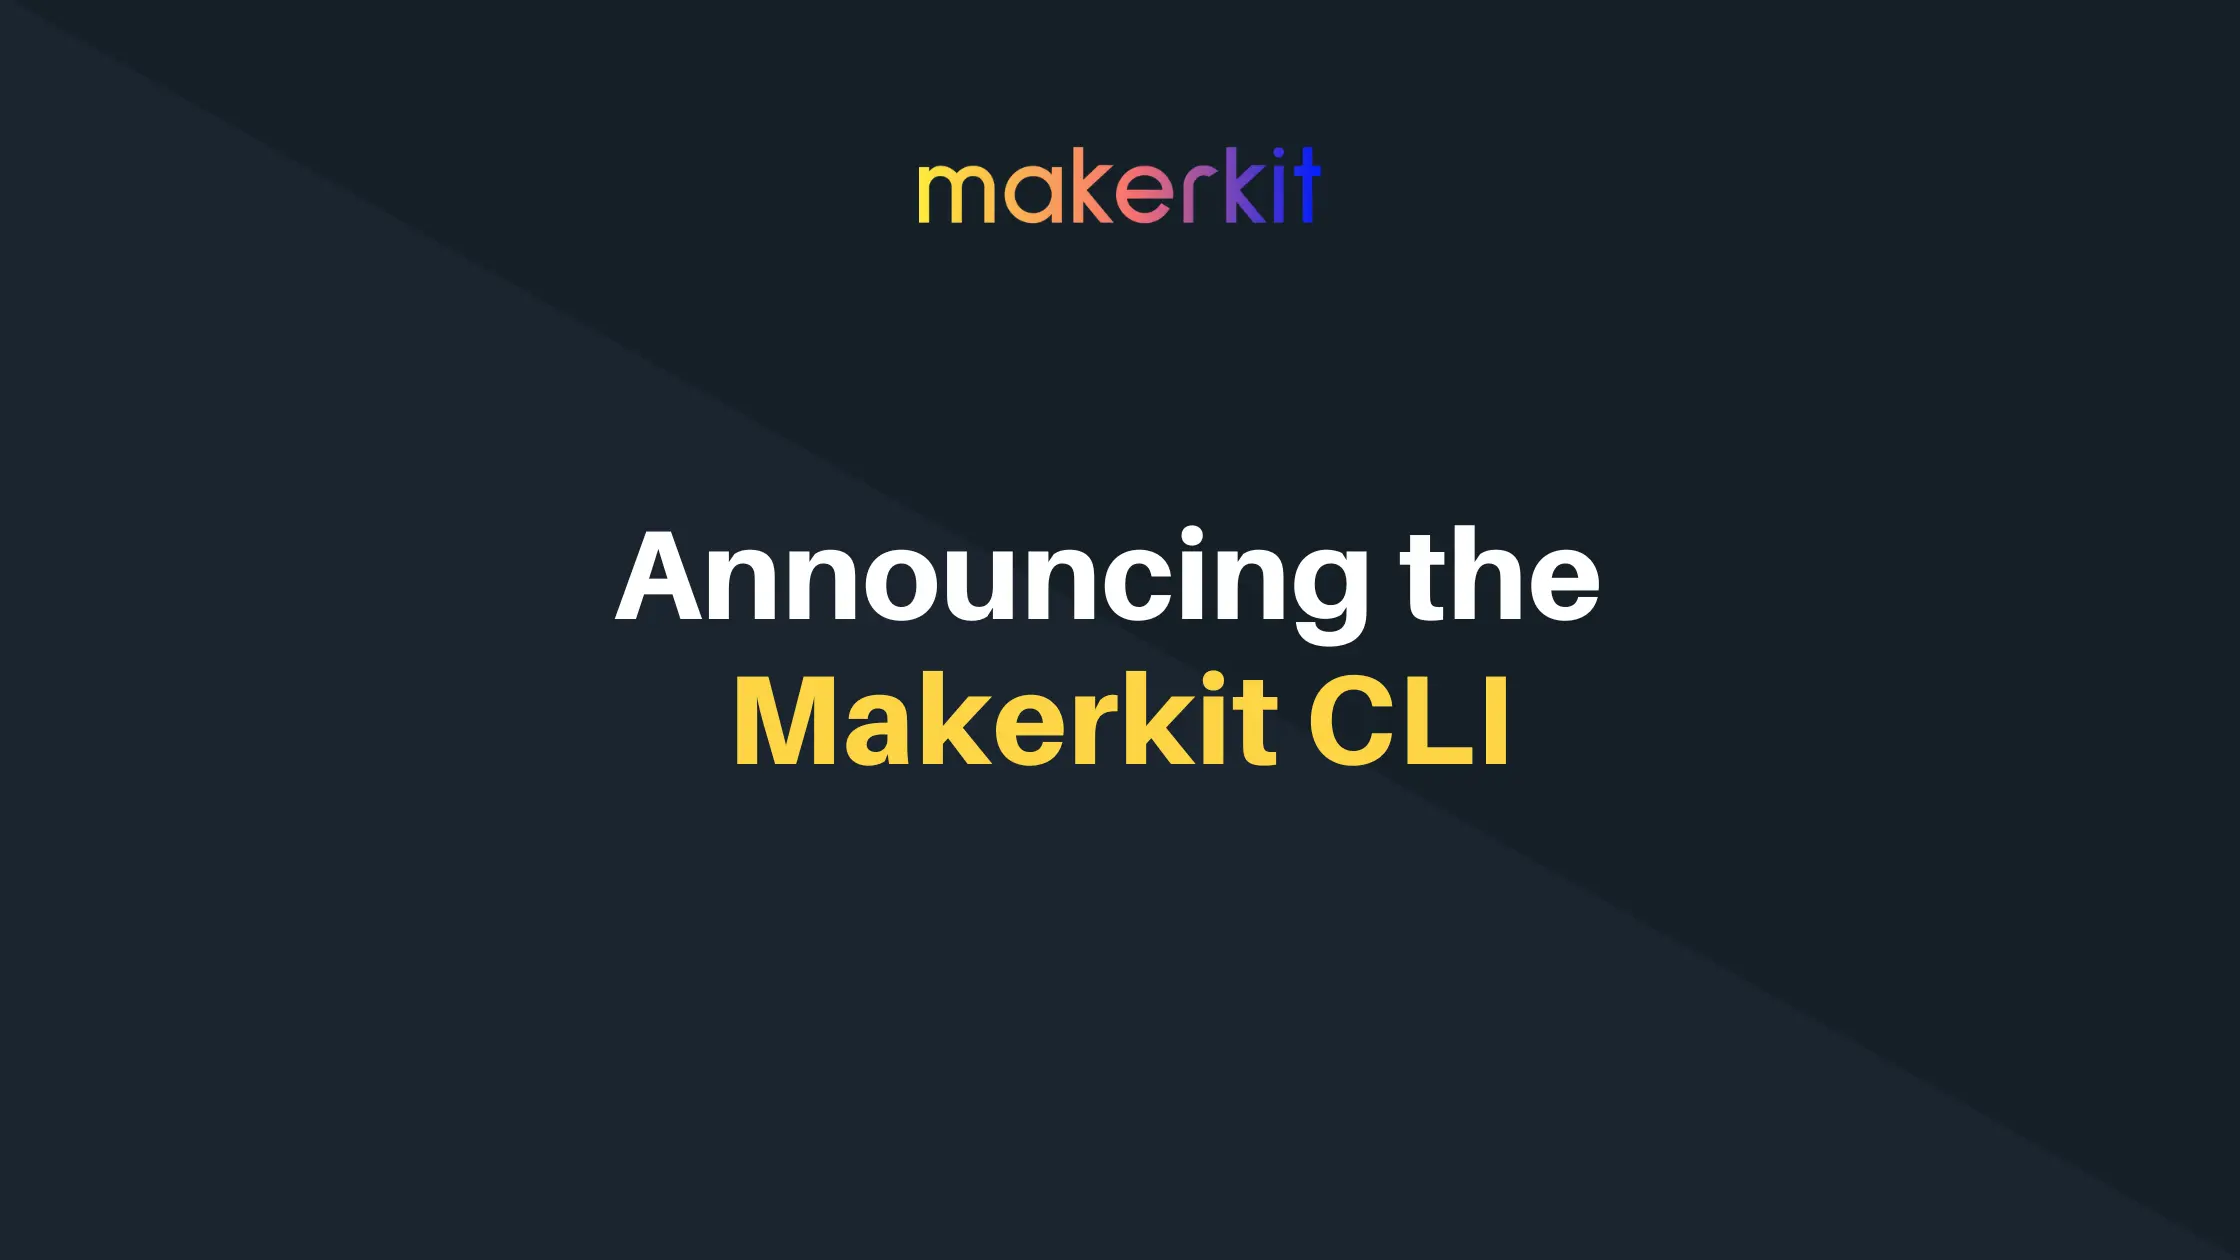 Cover Image for Announcing the Makerkit CLI